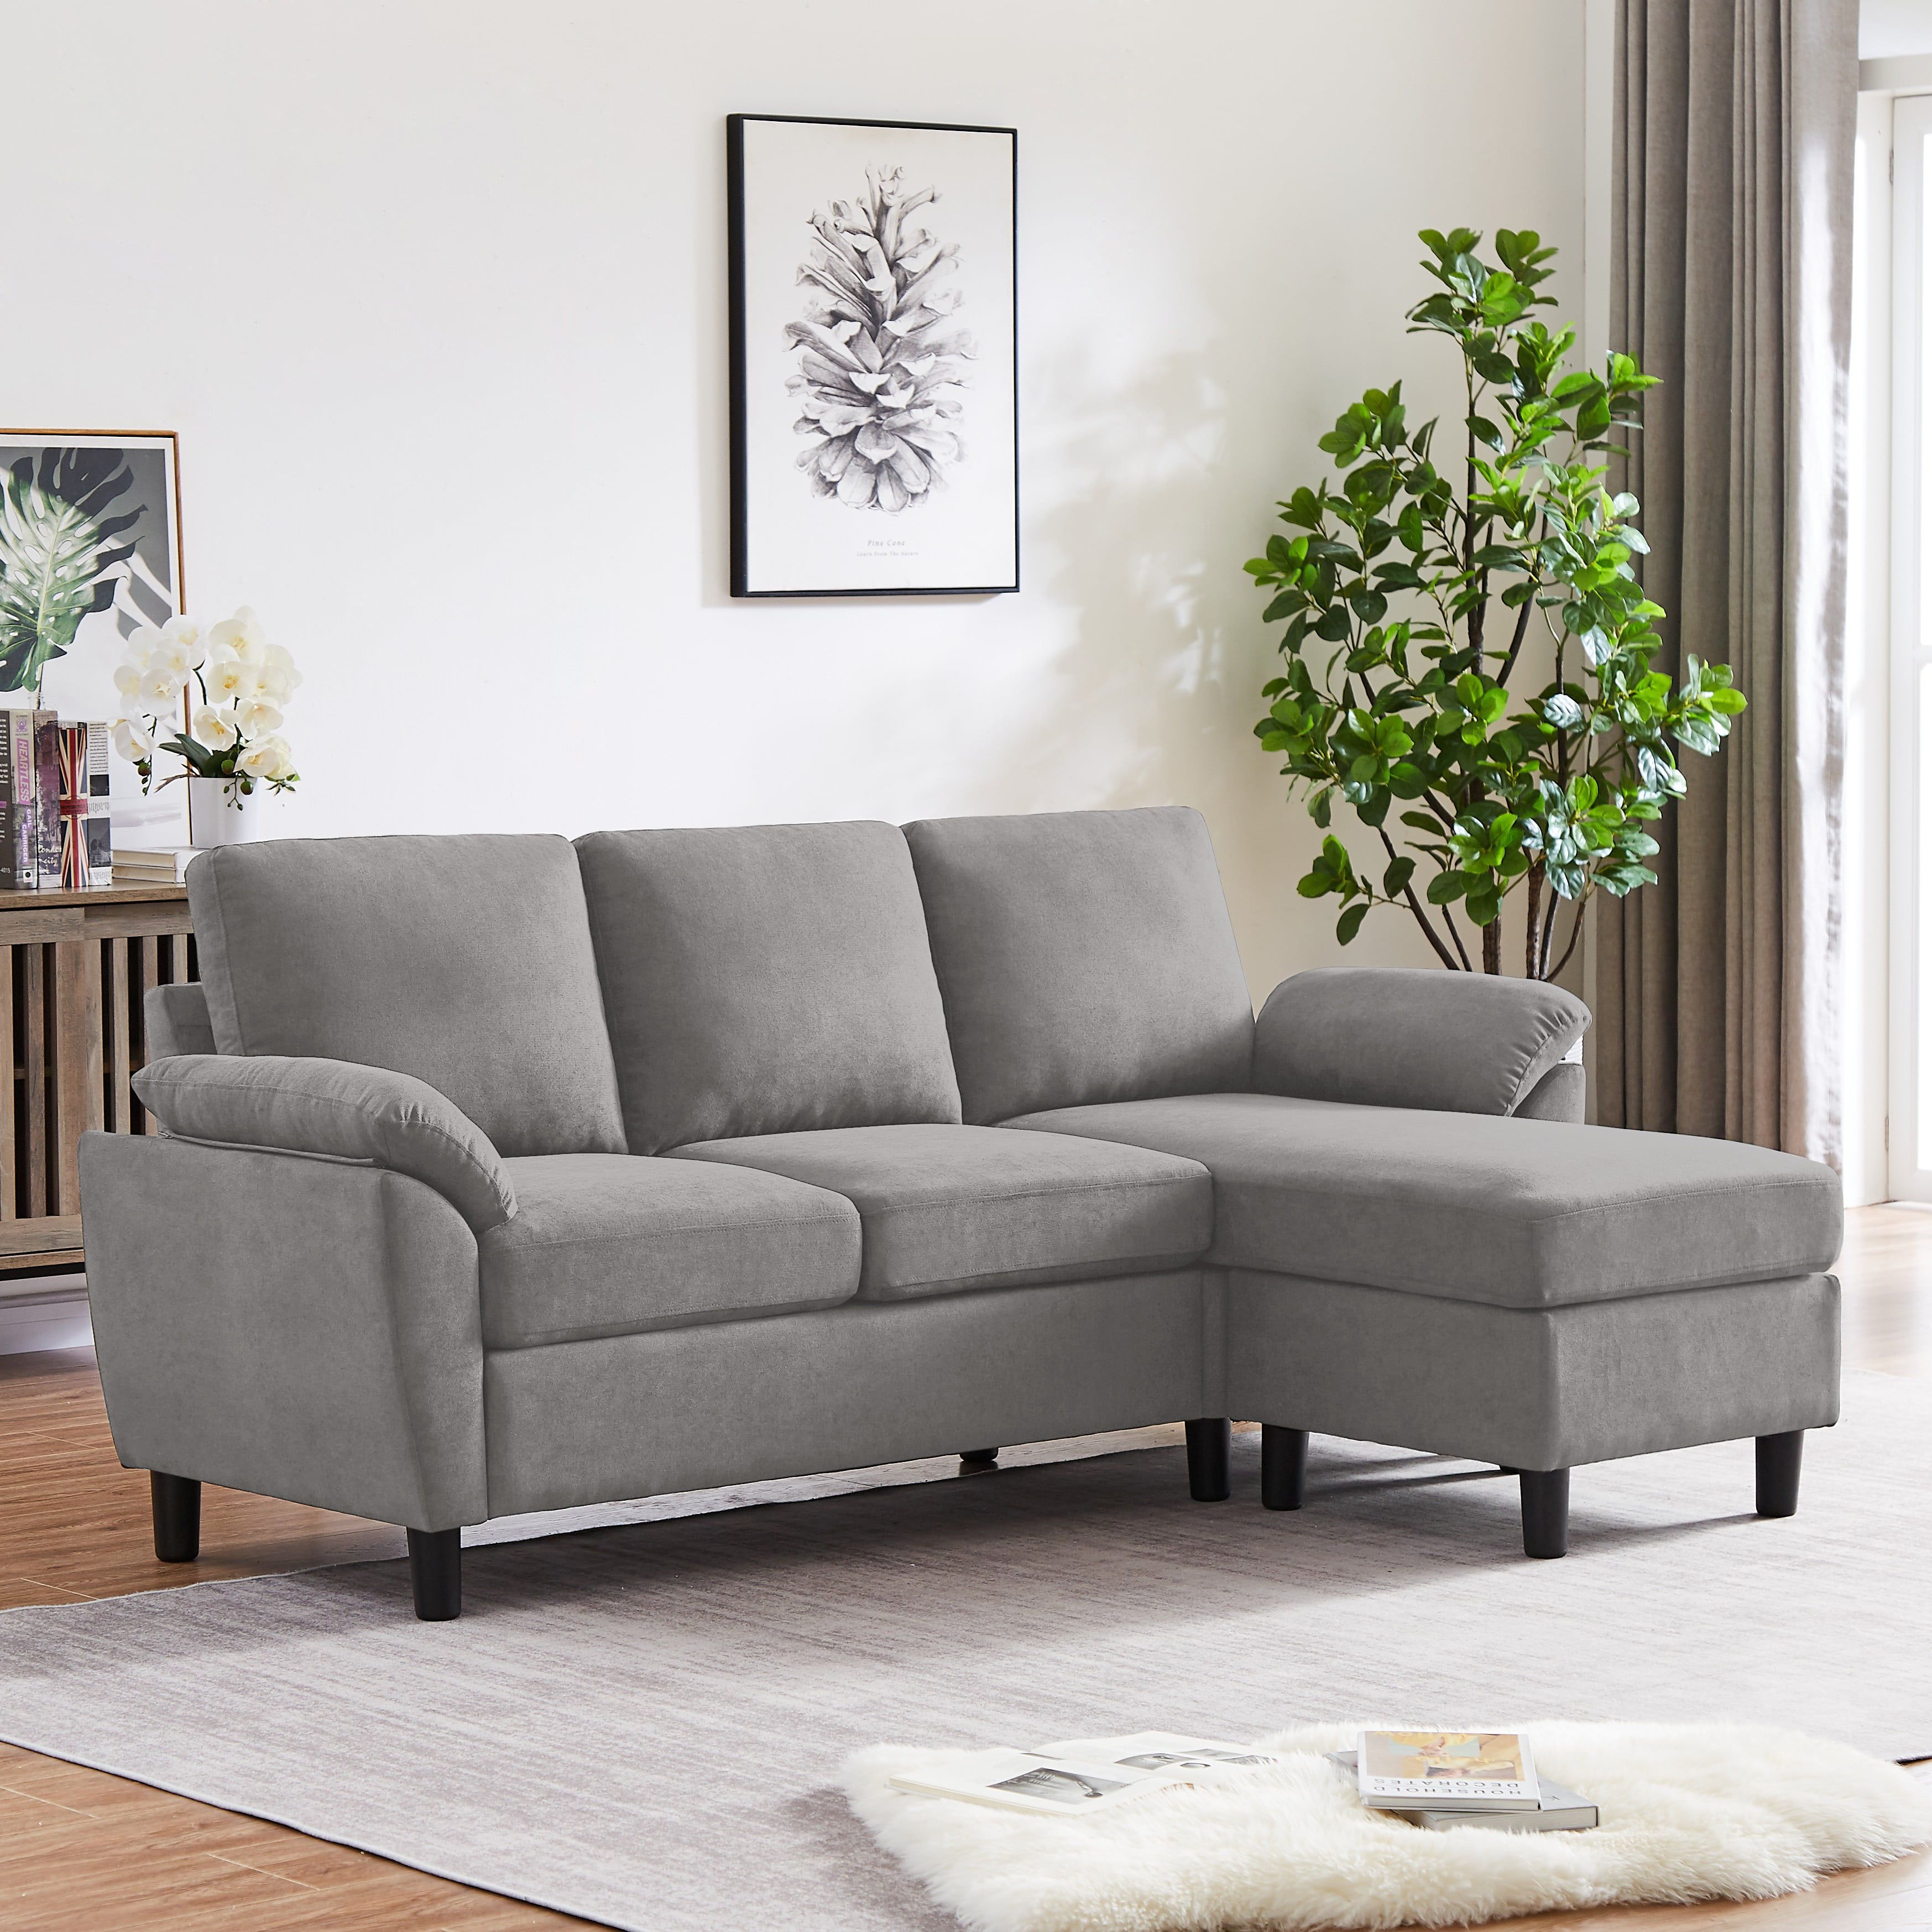 Jarenie Modern Fabric L Shapped Sofa Sectional Couches For Living Room  Convertible Sofa With Matching Chaise For Office, Apartment, Studio –  Walmart Regarding Studio Sectional Couches (View 9 of 15)